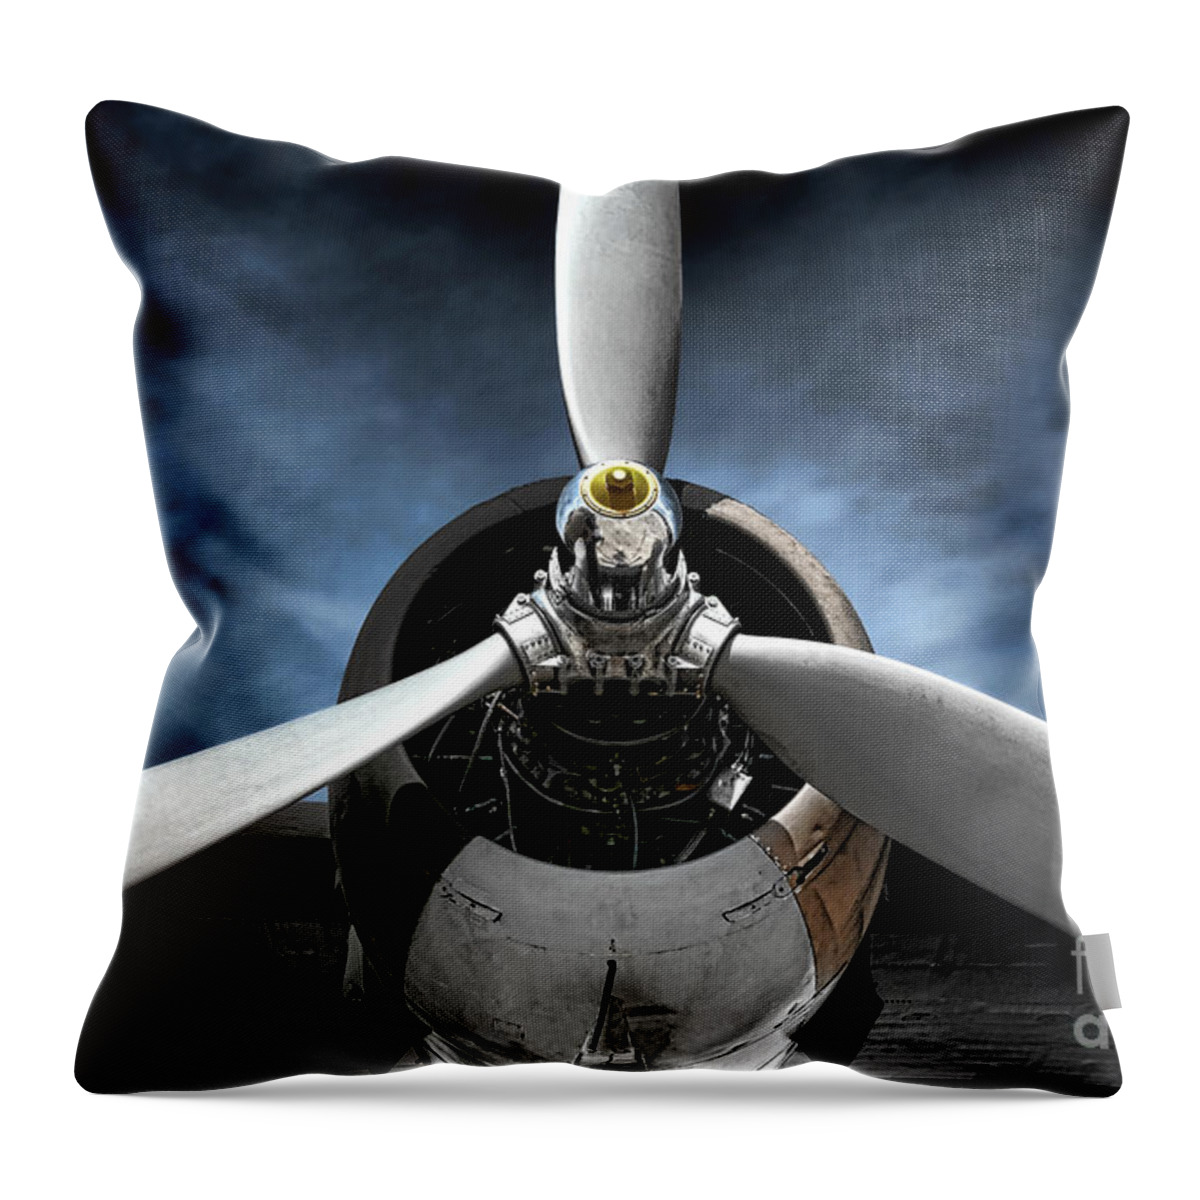 #faatoppicks Throw Pillow featuring the photograph The Mission by Olivier Le Queinec